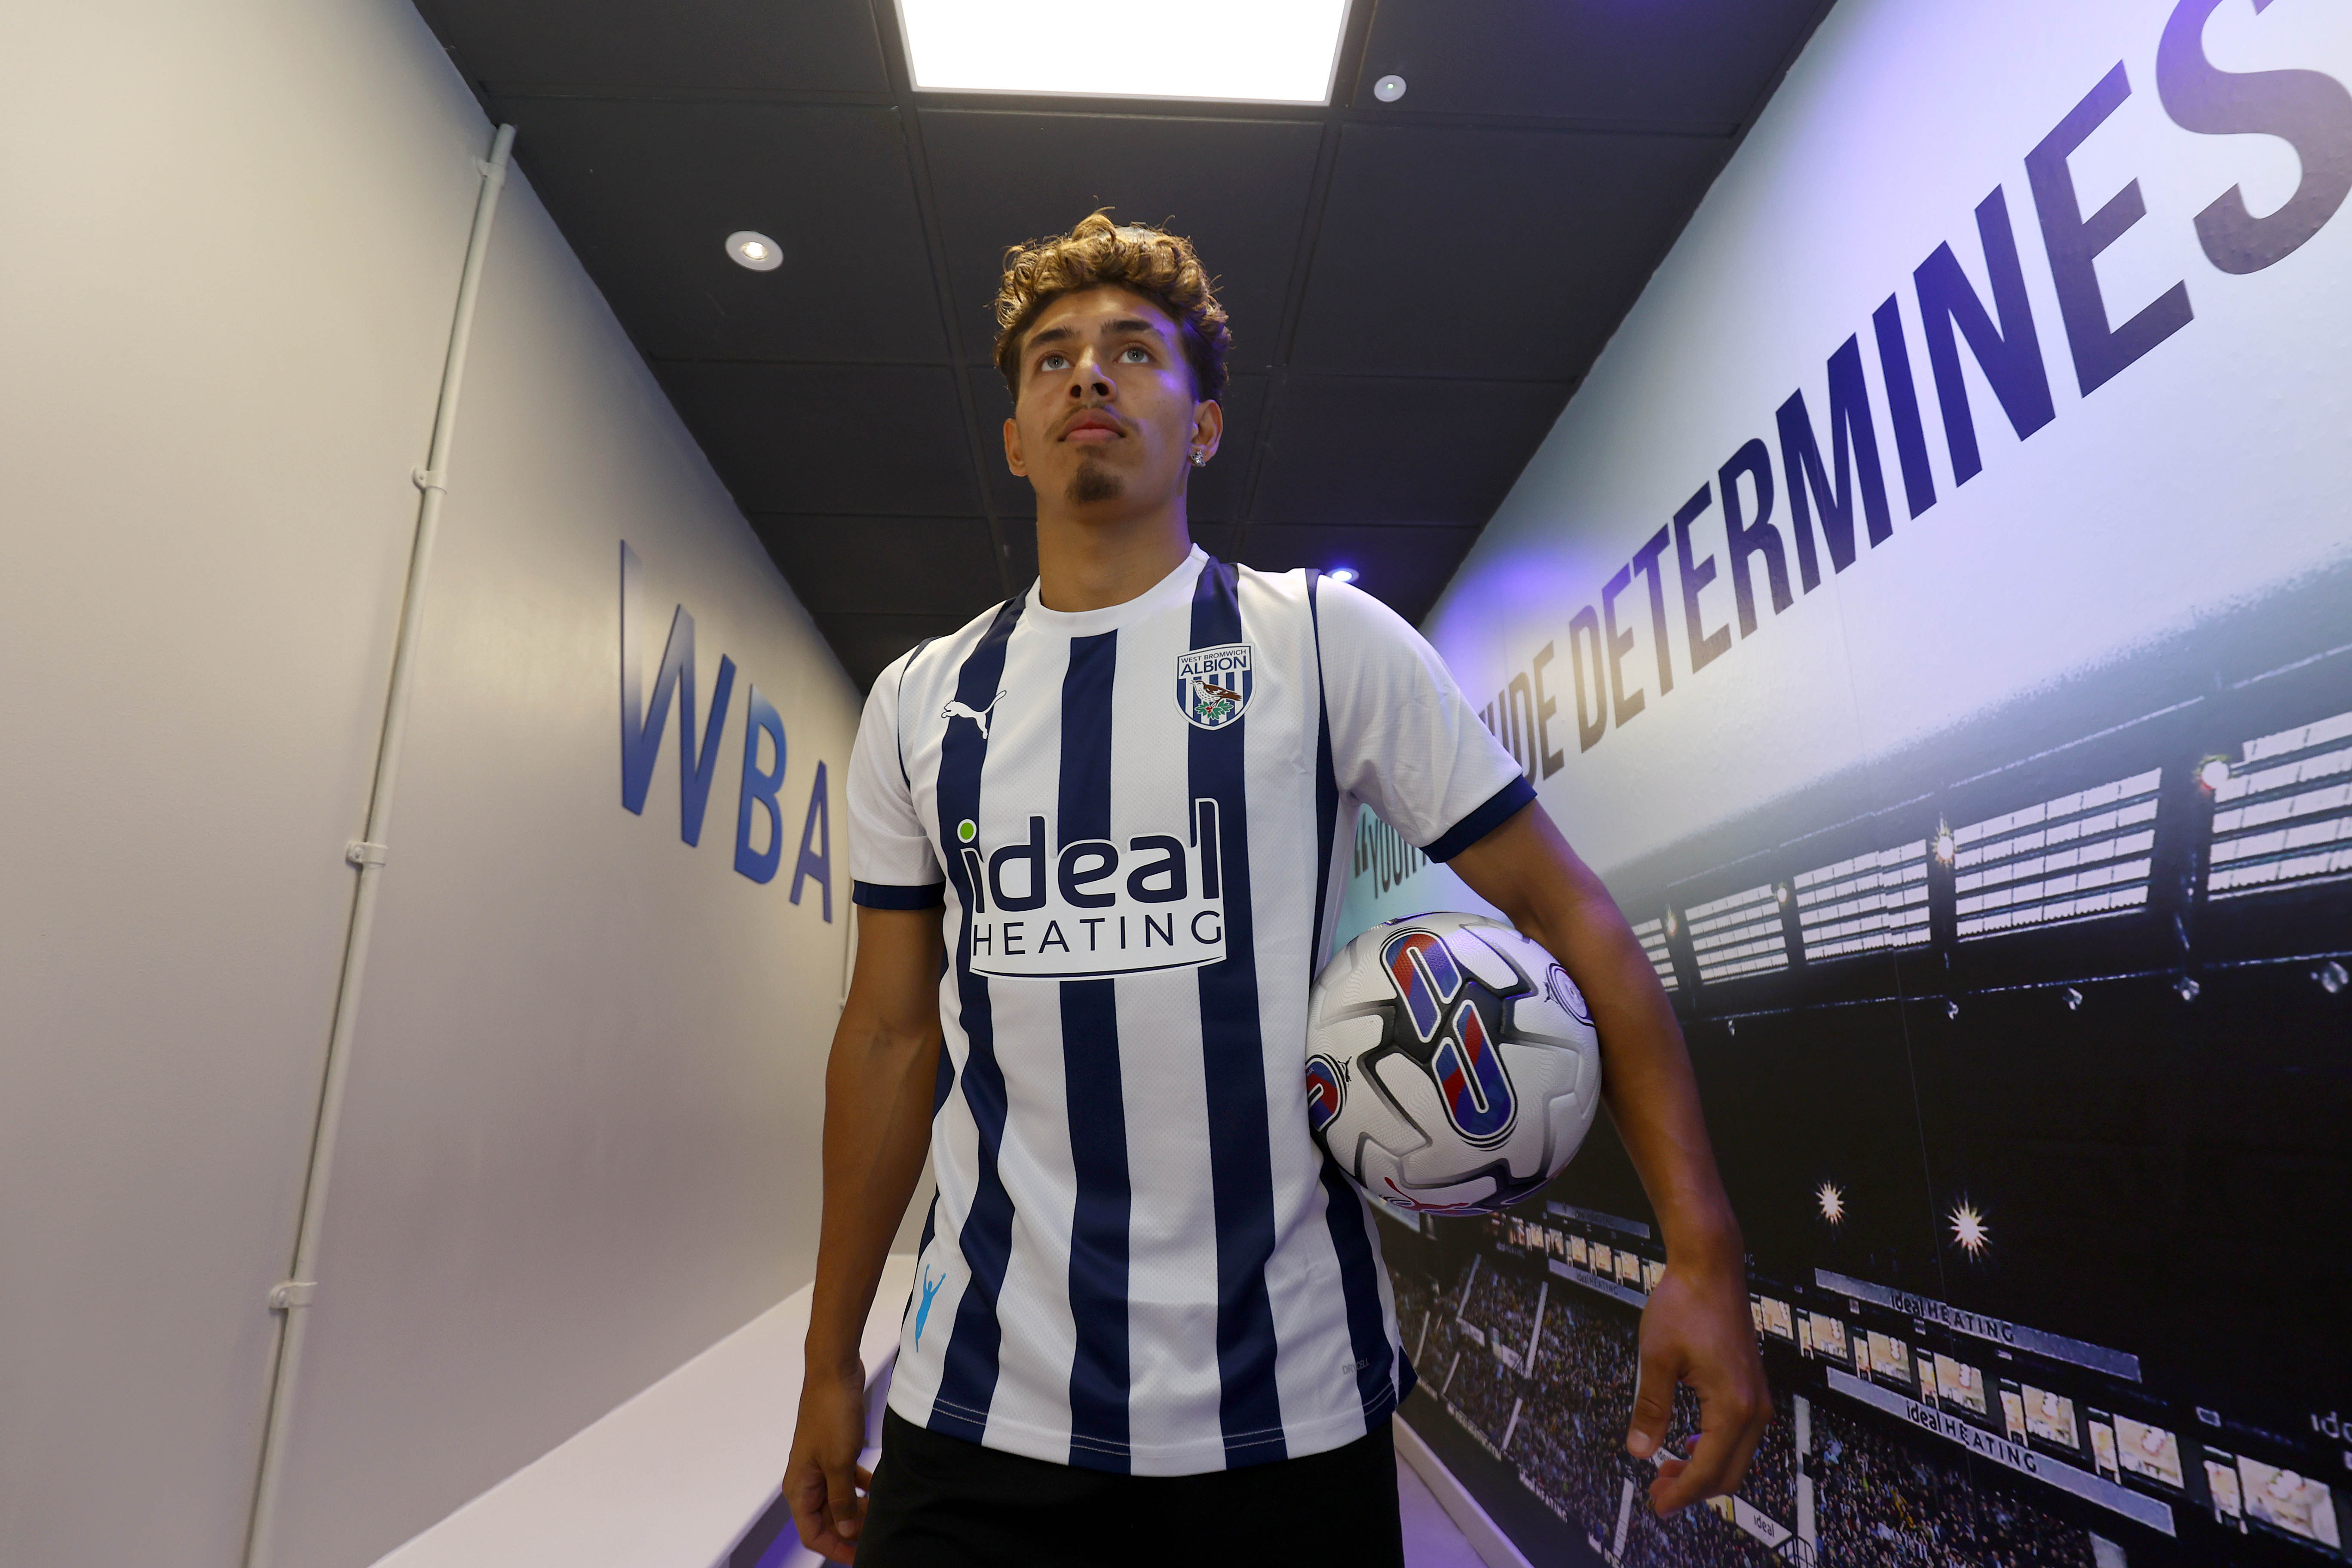 Jeremy Sarmiento to West Brom: Seagulls starlet bring some Baggies